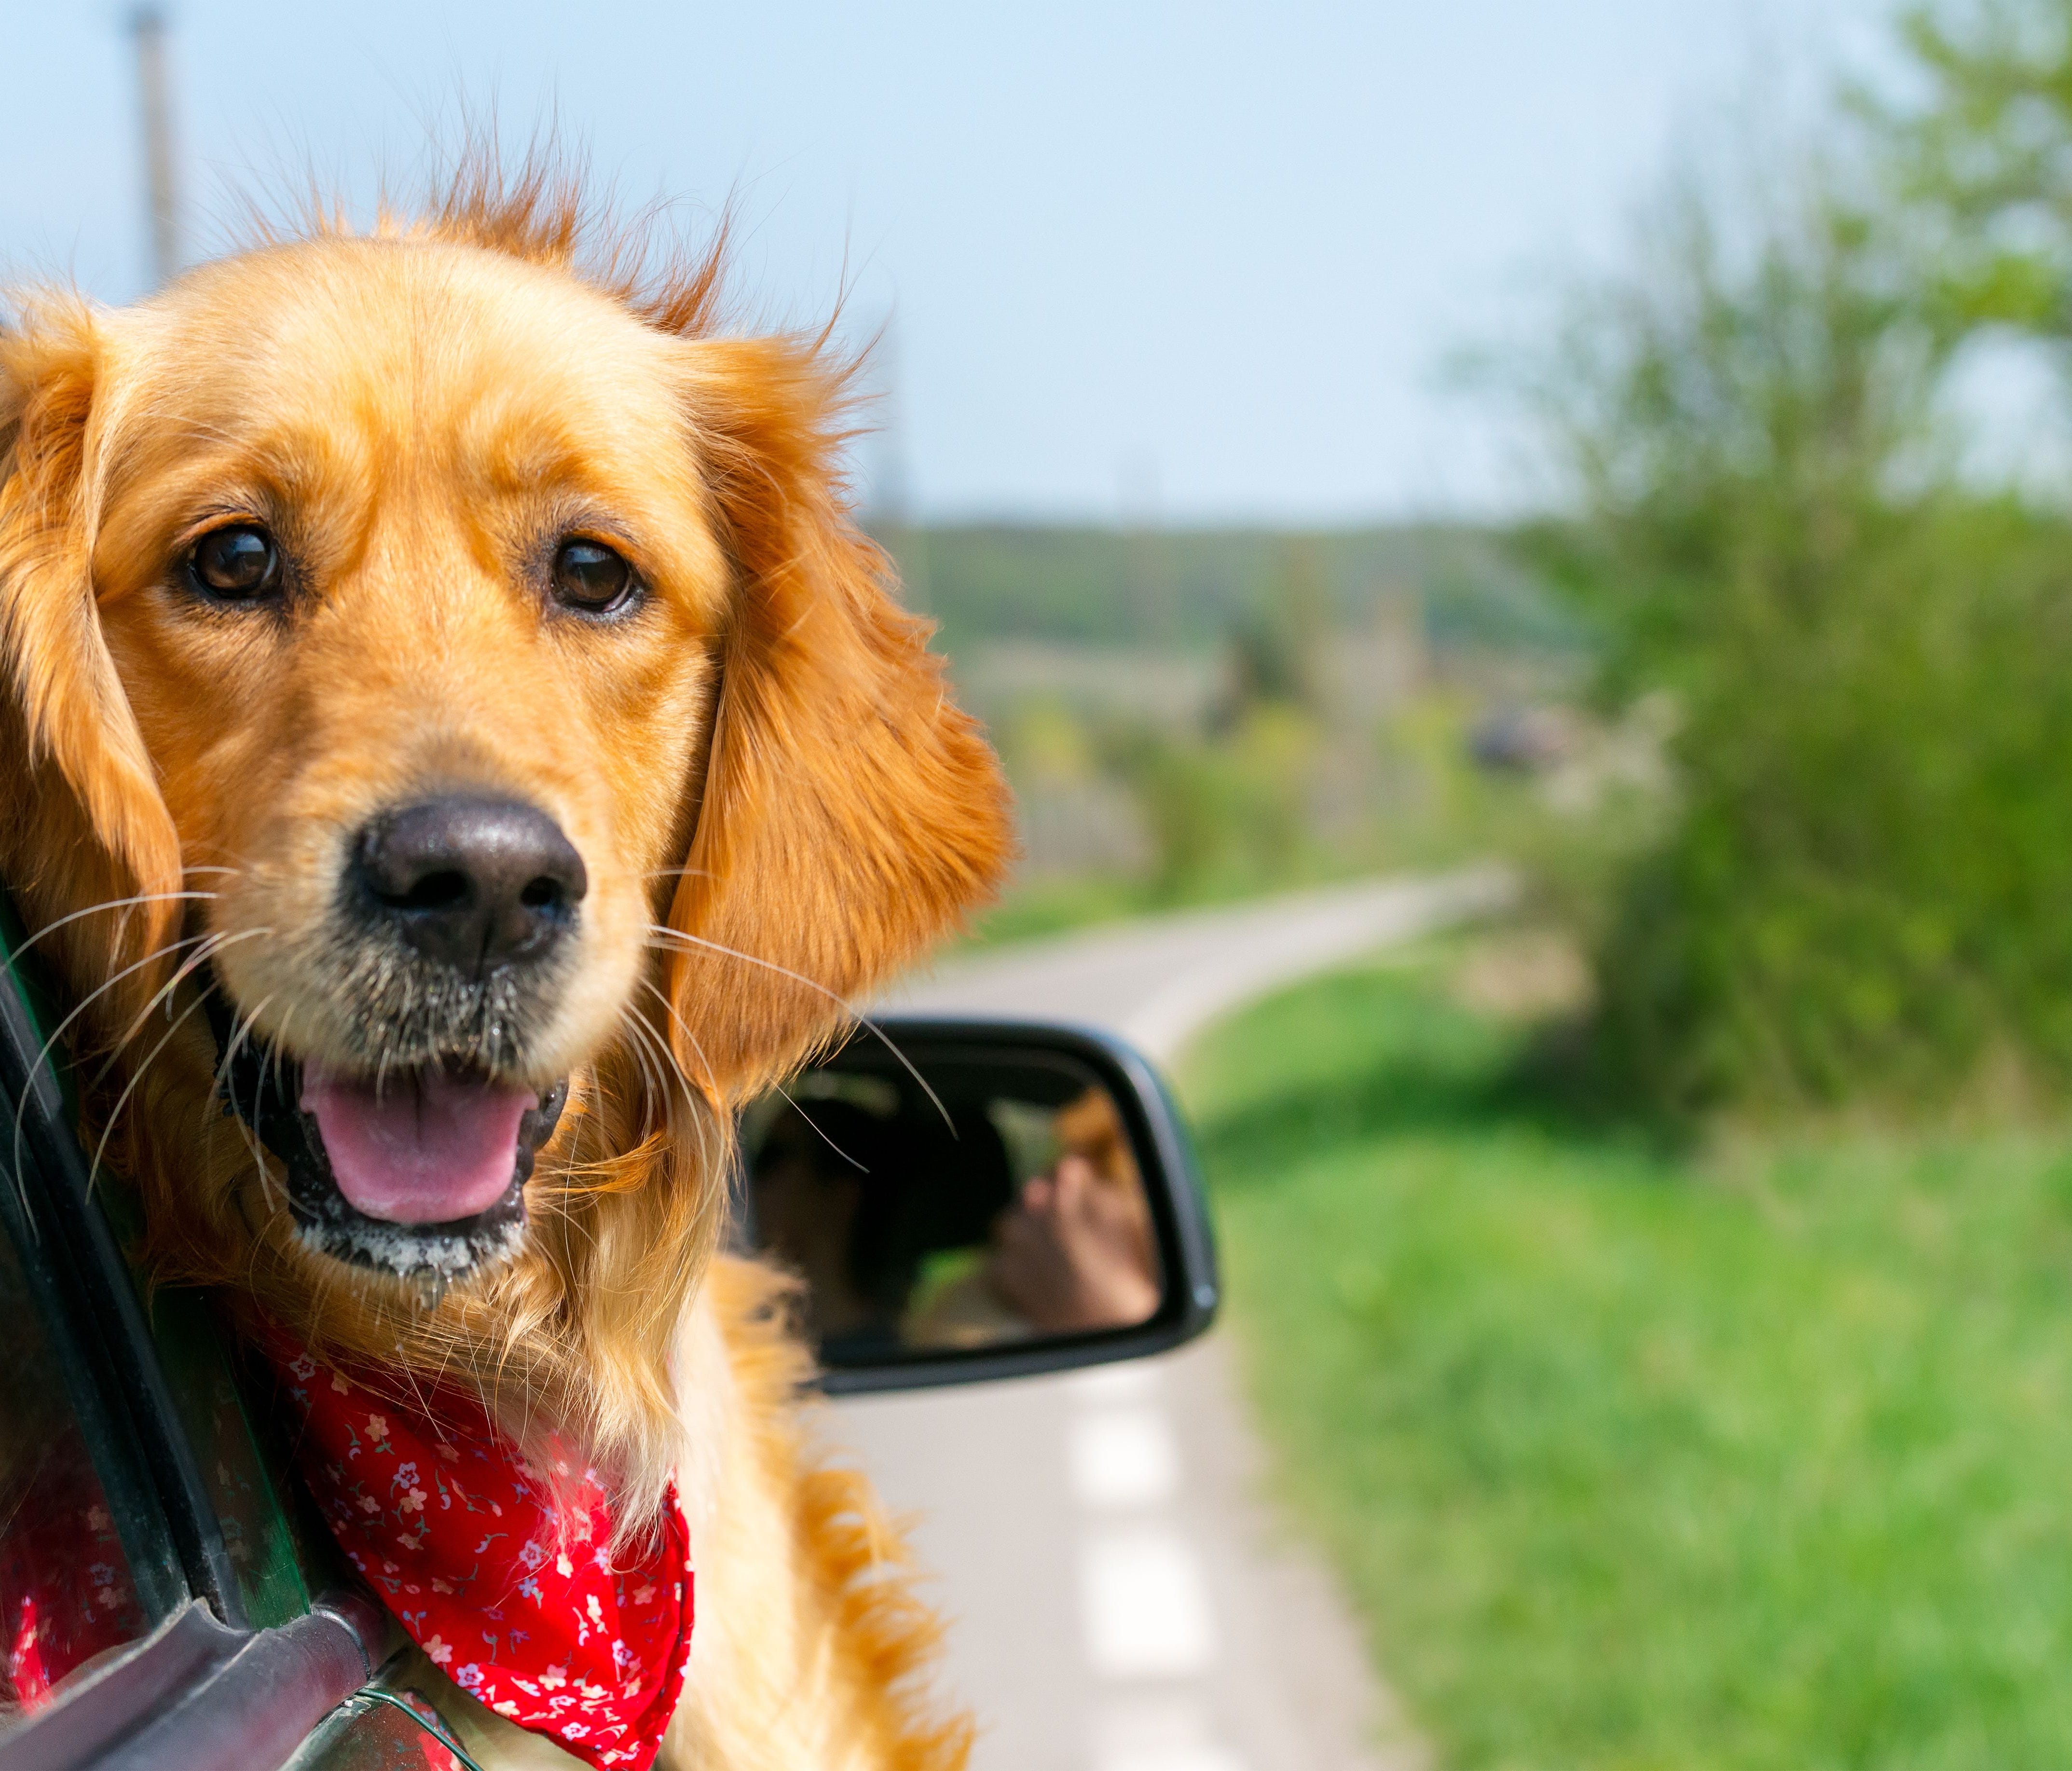 A dog can be great company on a road trip, but only if humans do their part.